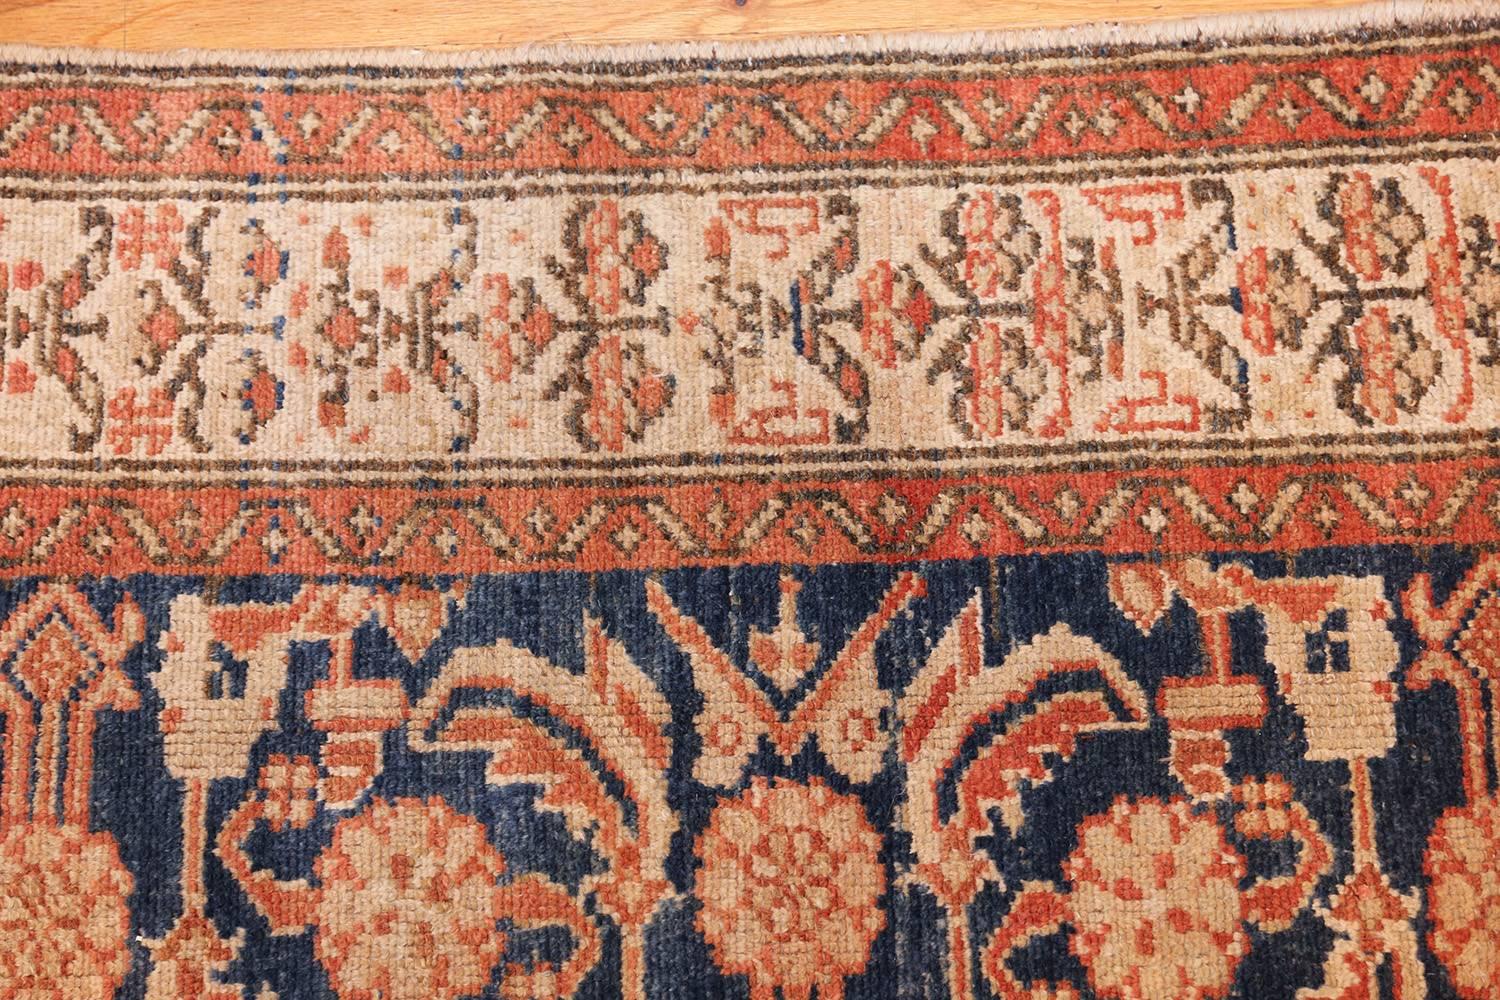 Antique Malayer Runner, Country of Origin: Persia, Circa: 1920 — Size: 3 ft 2 in x 16 ft 10 in (0.97 m x 5.13 m)

